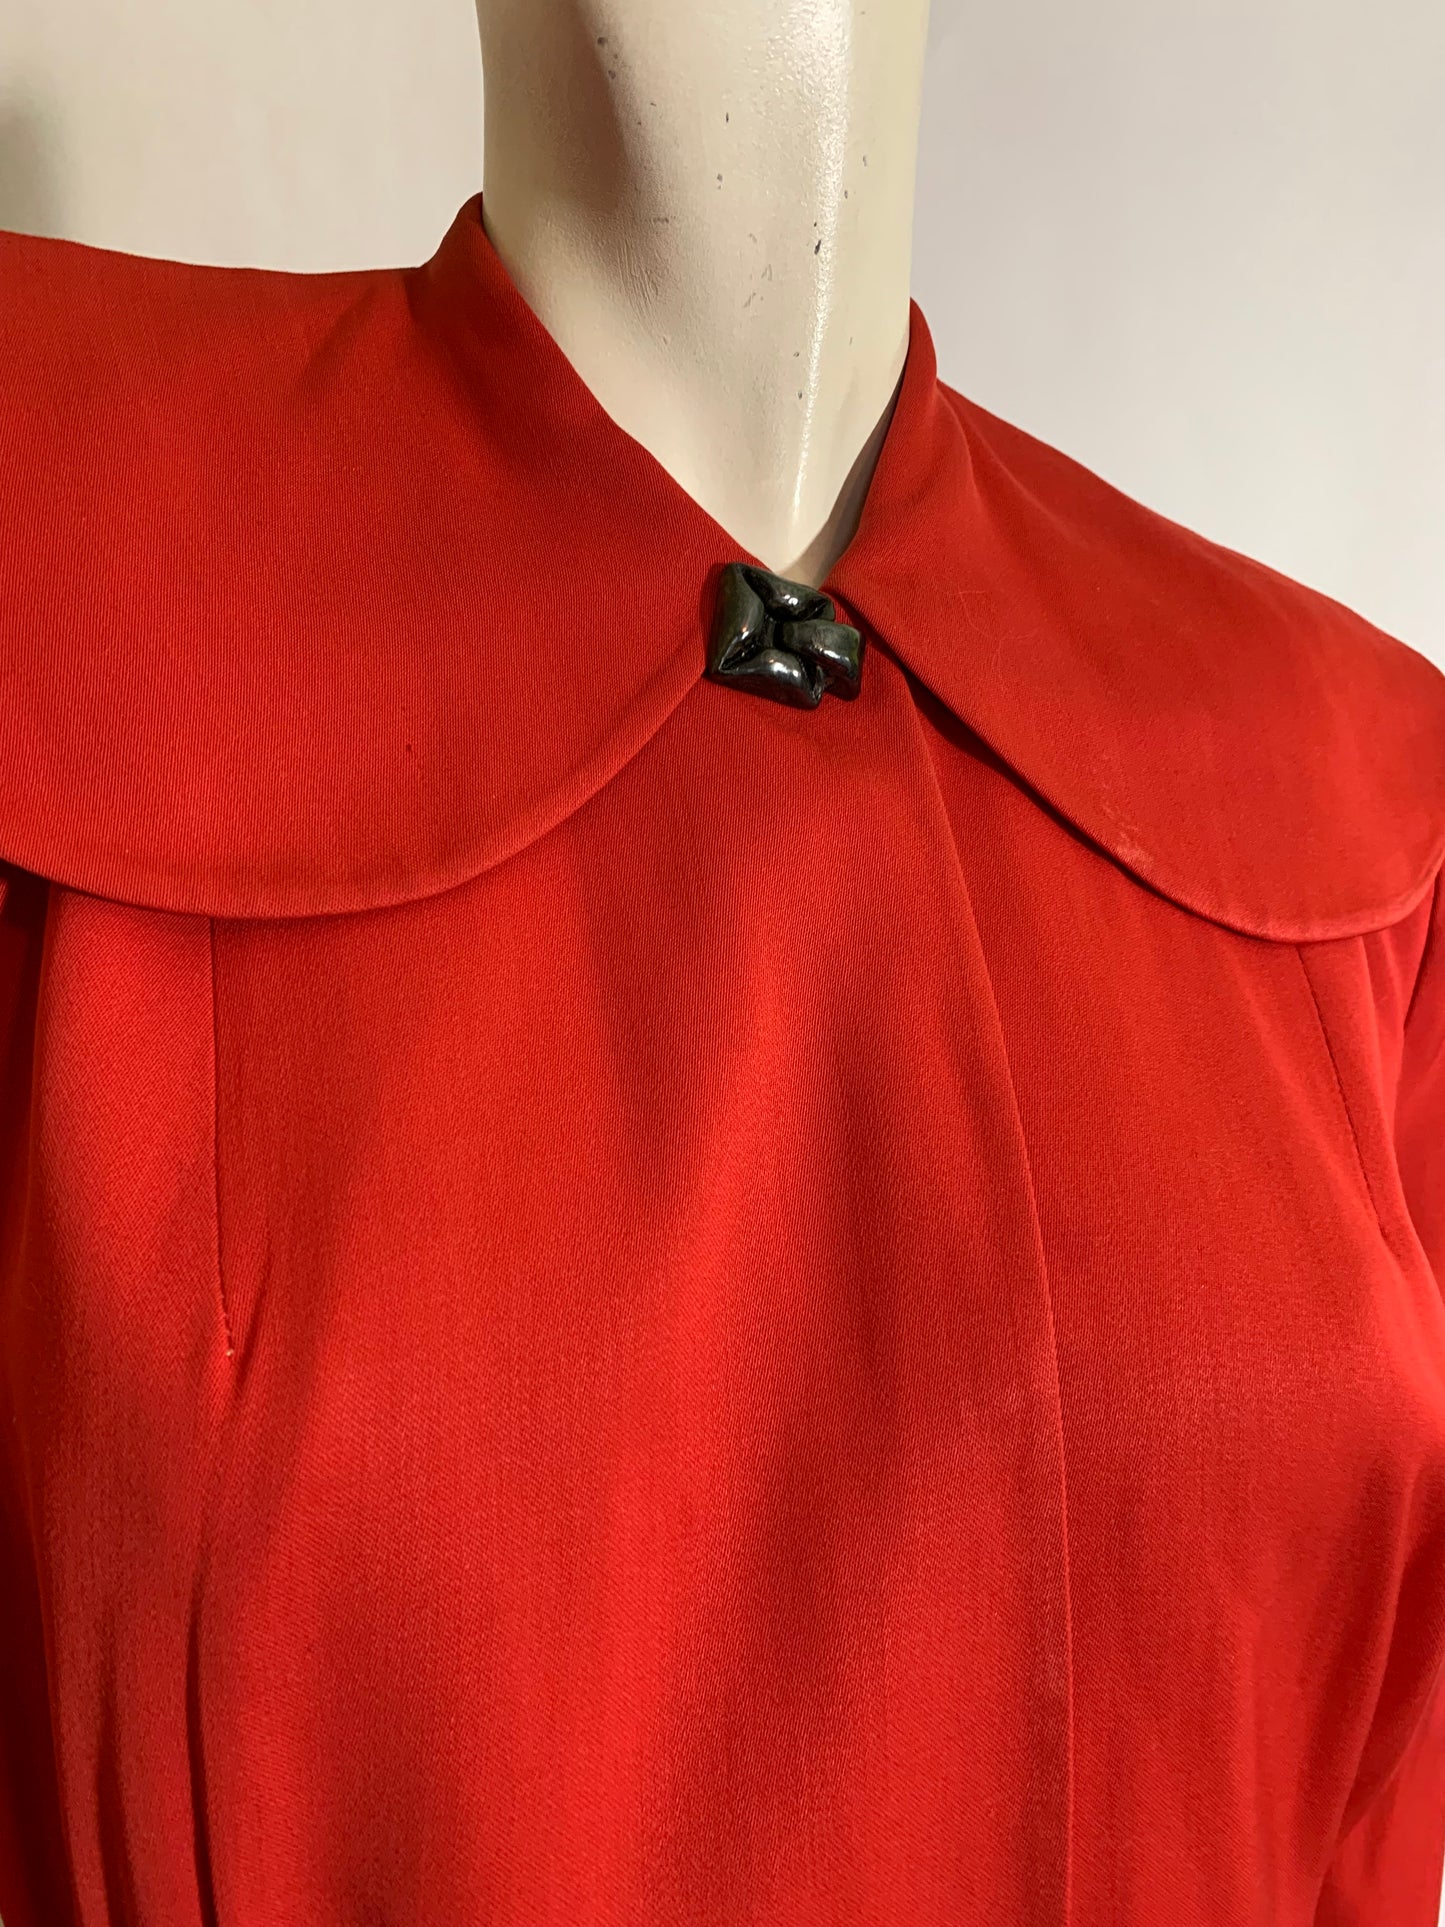 Apple Red Rayon Suit Jacket with Round Collar circa 1940s